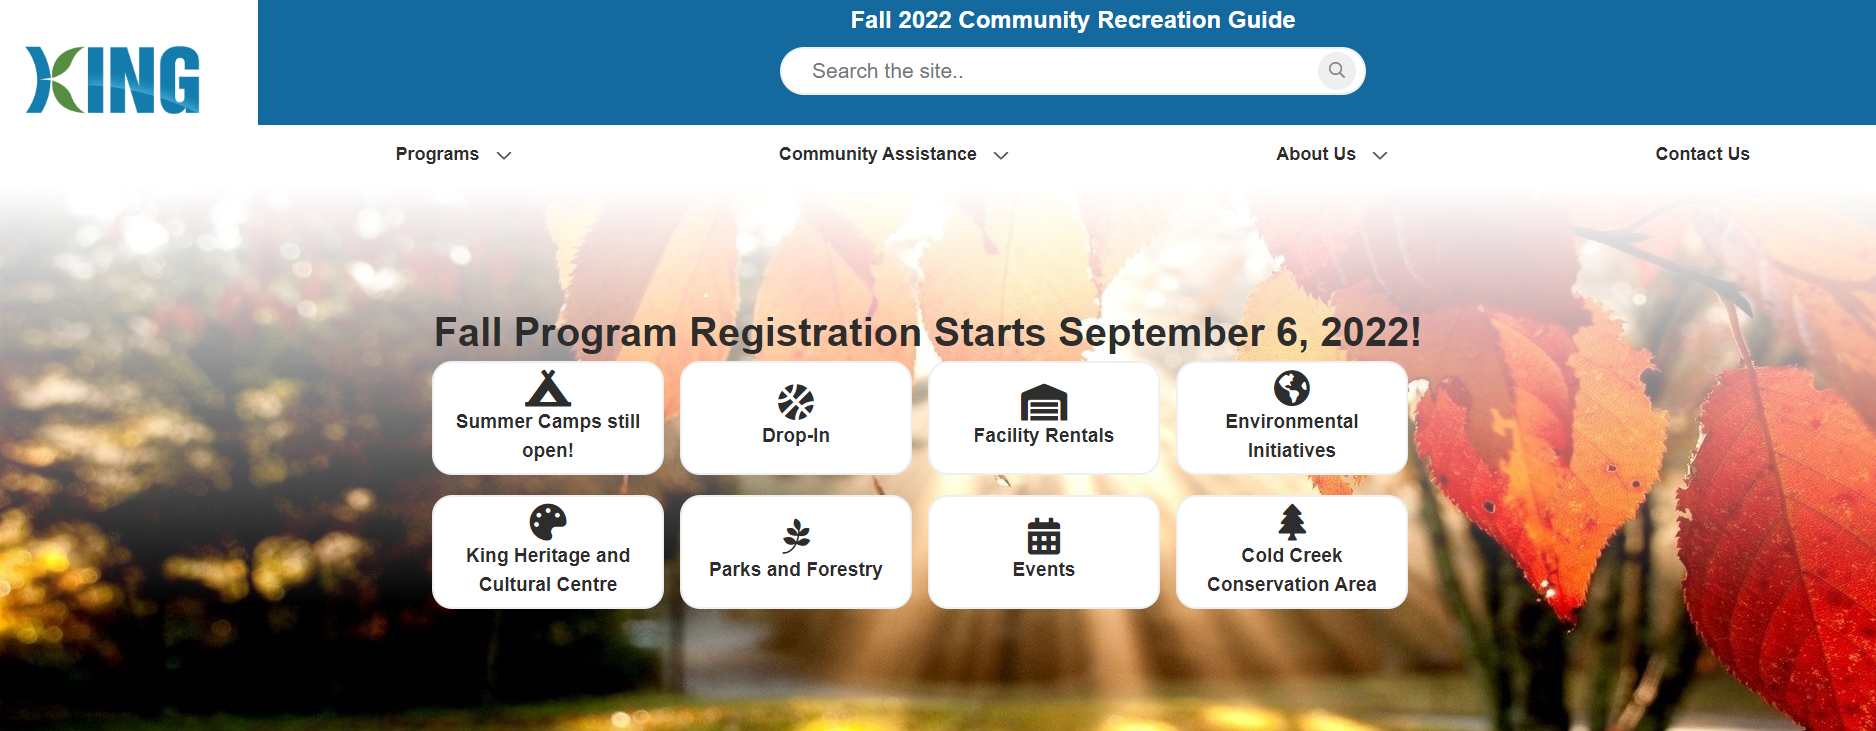 fall 2022 community recreation guide